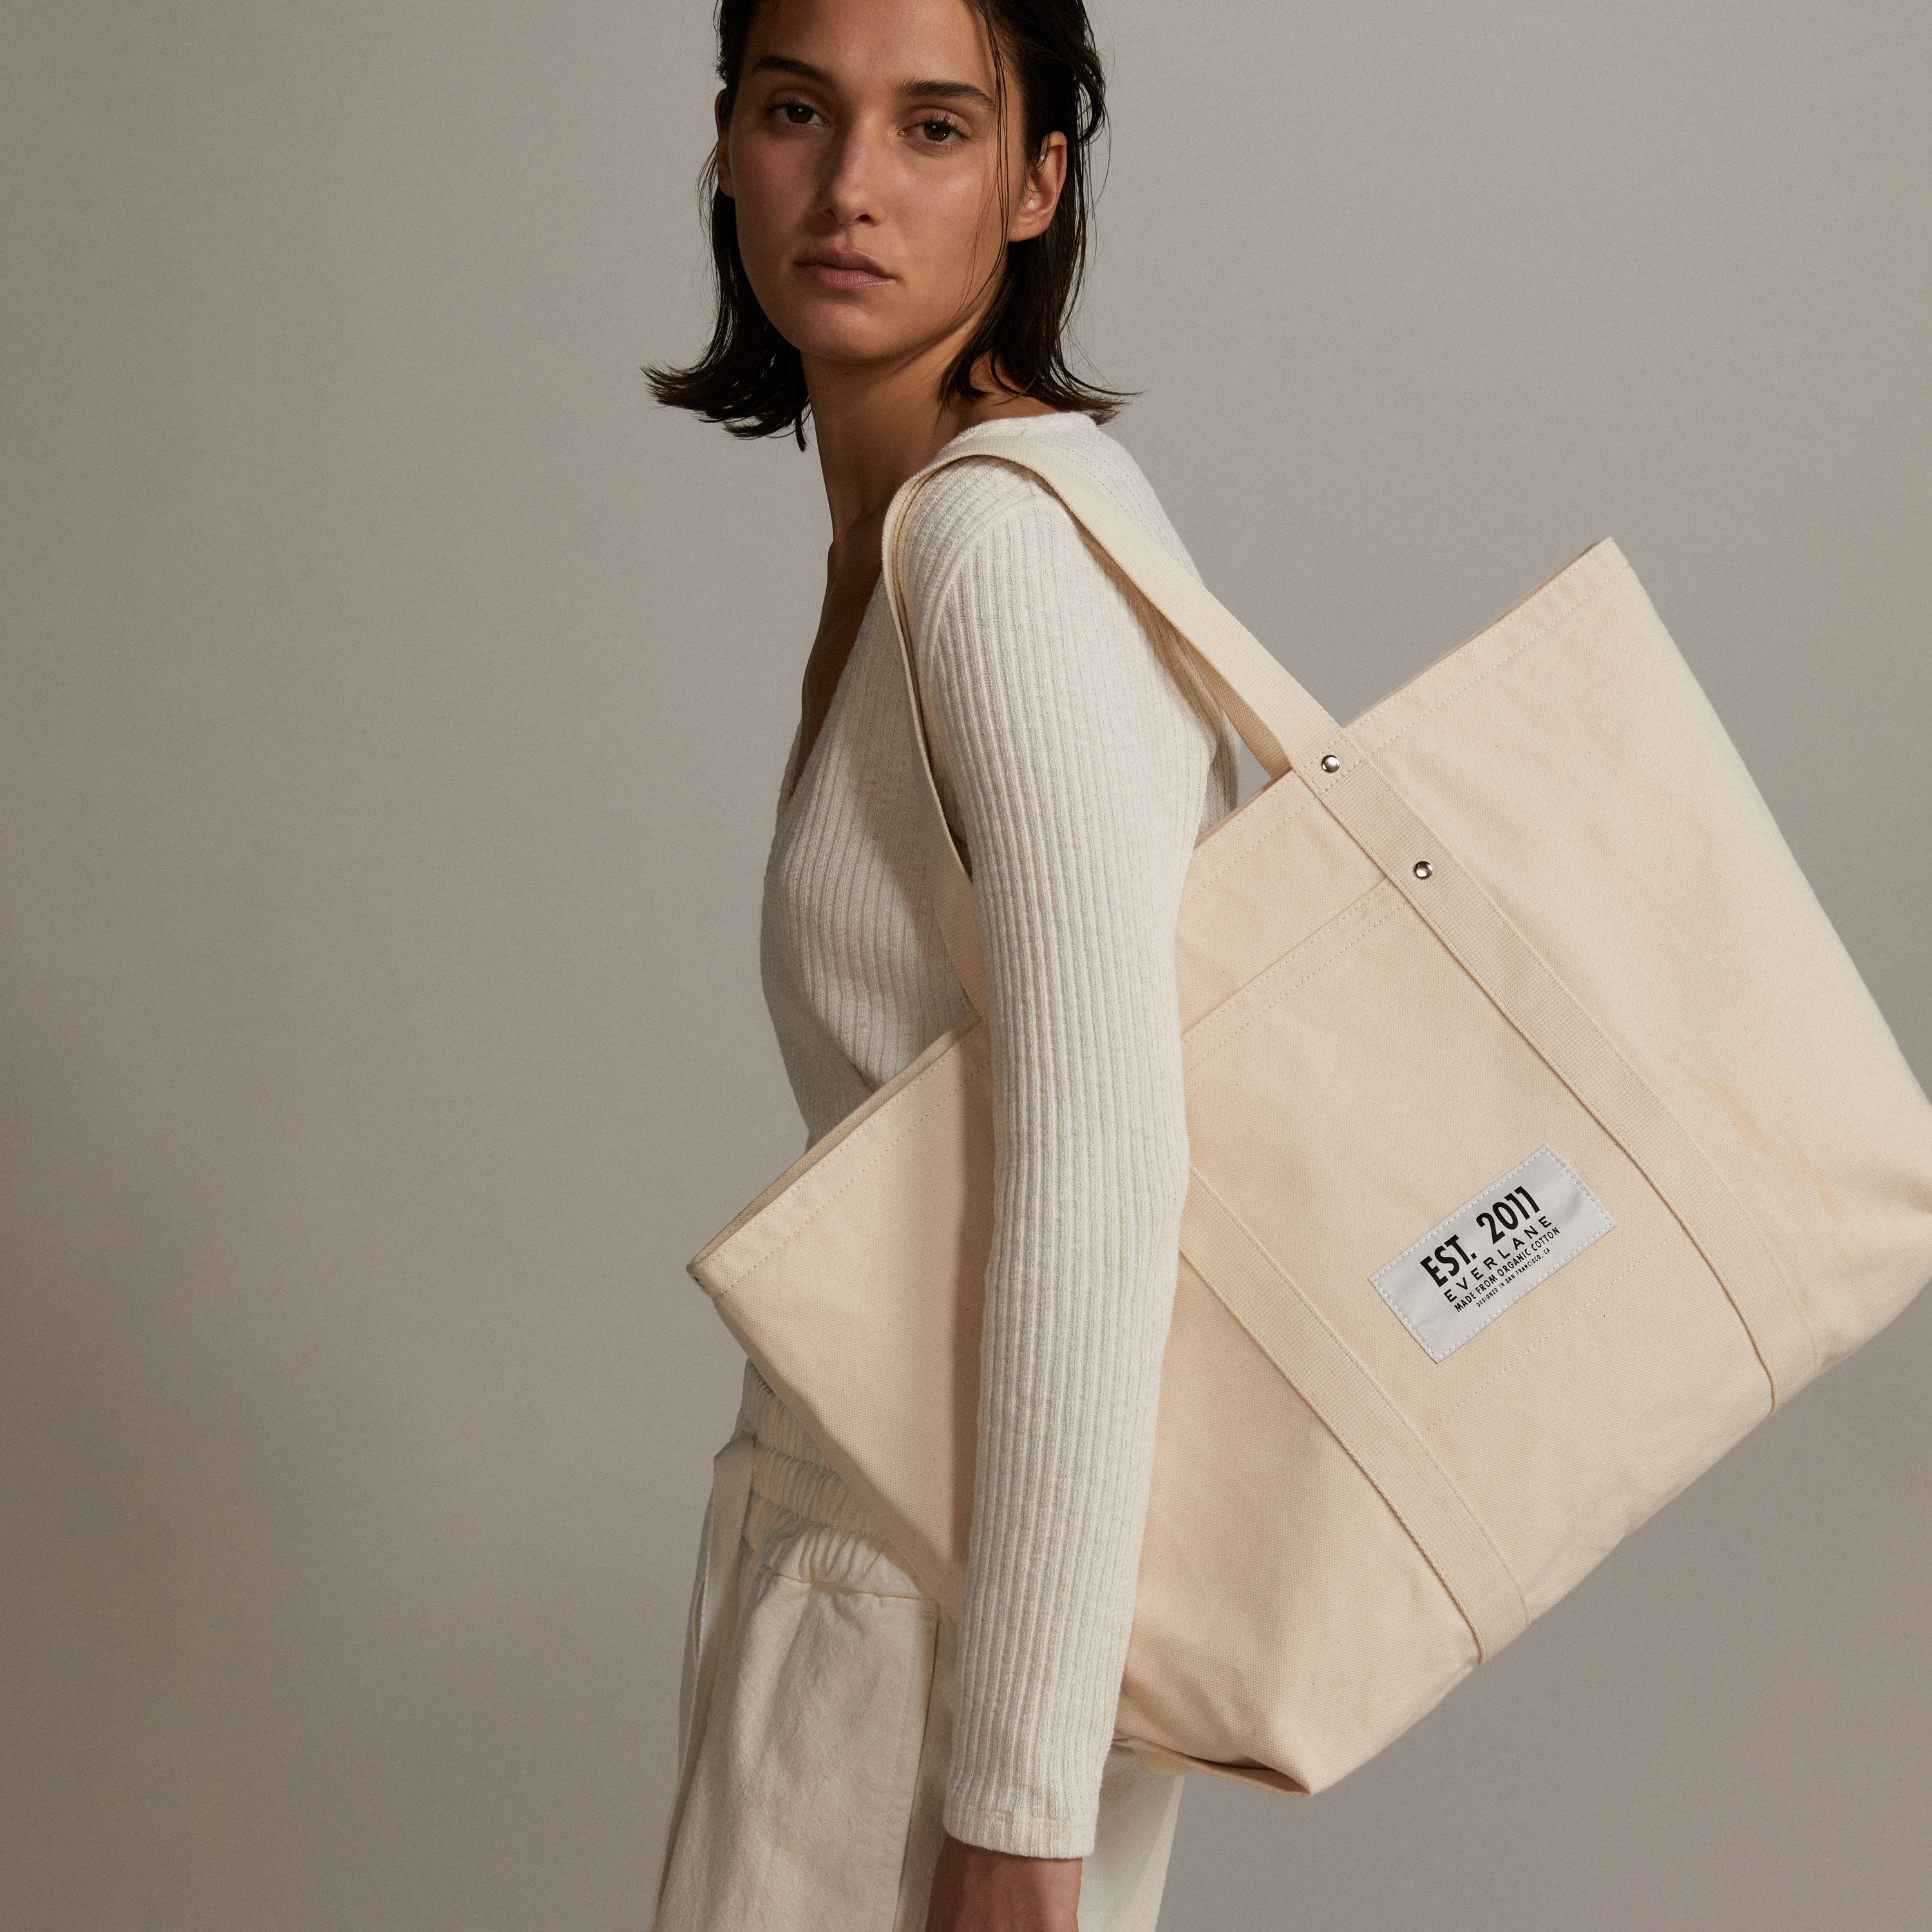 The Organic Canvas Weekender Cappuccino – Everlane